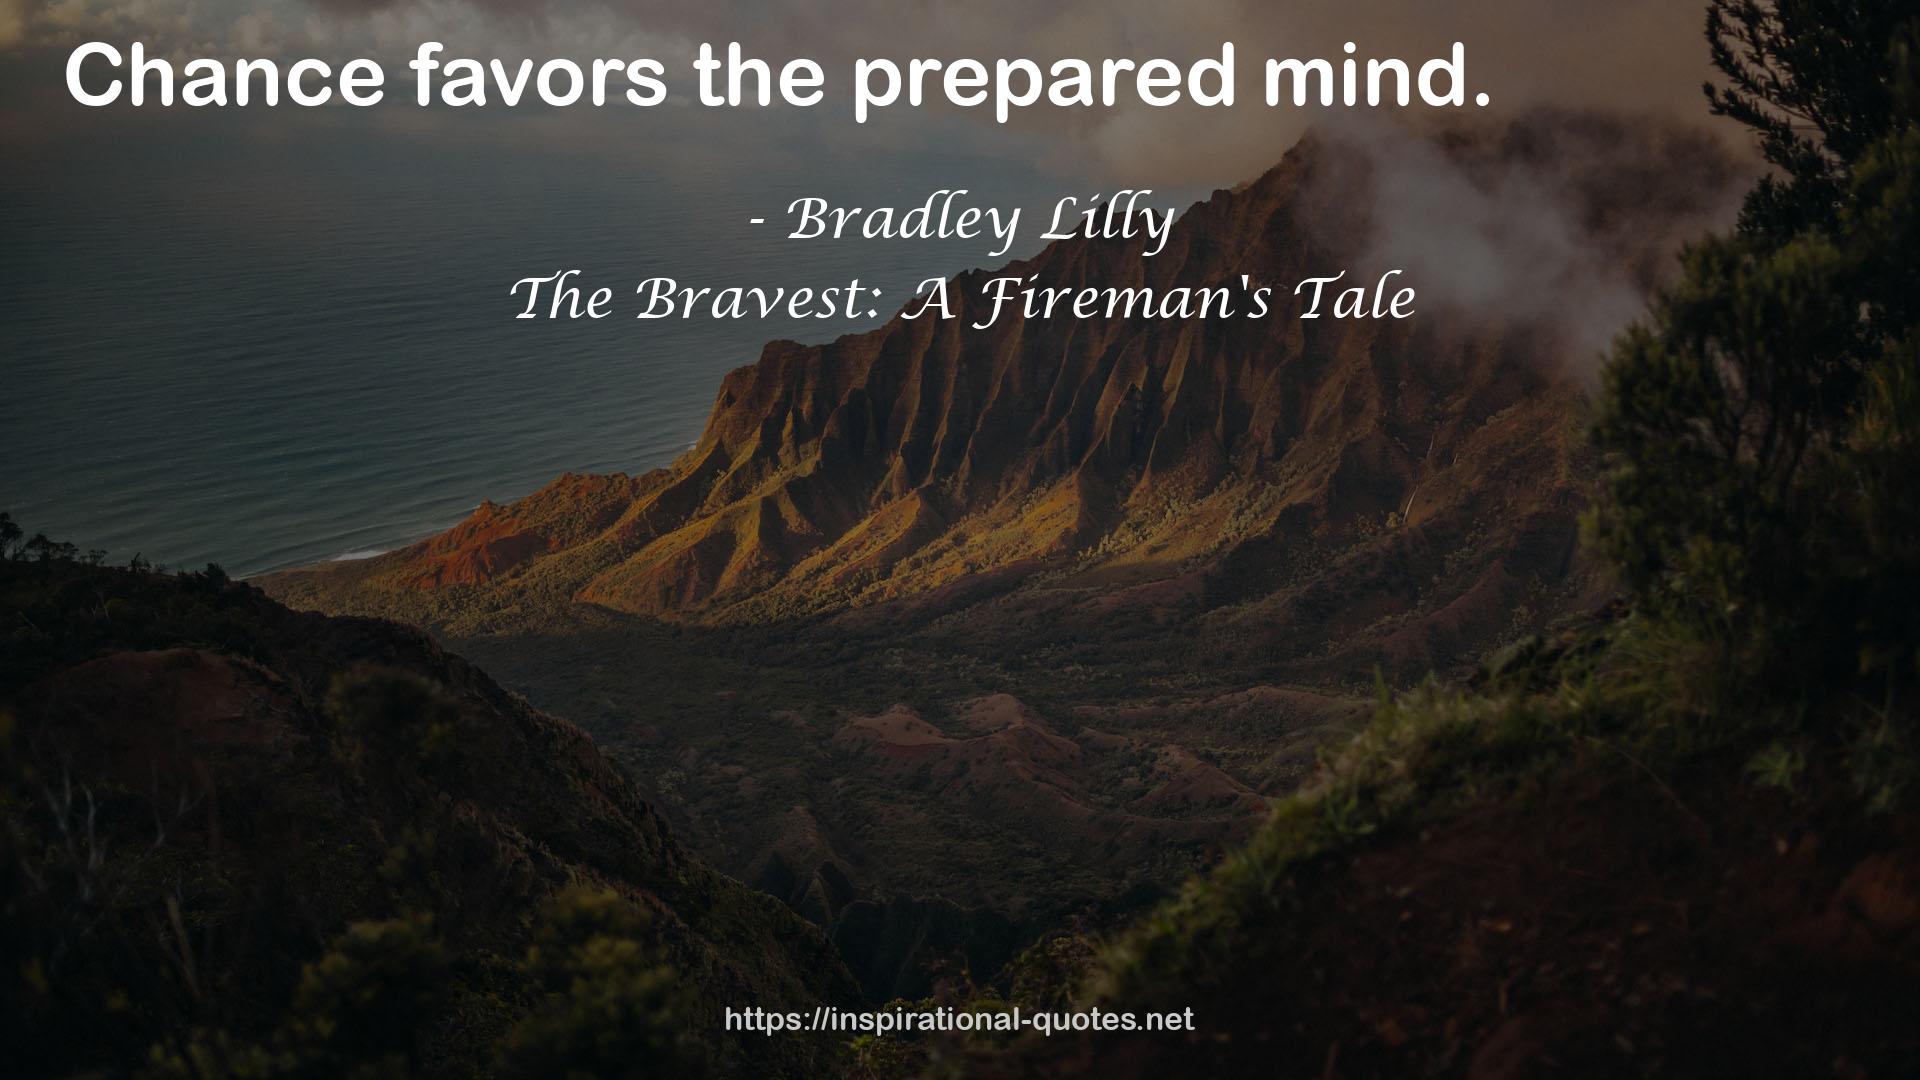 The Bravest: A Fireman's Tale QUOTES